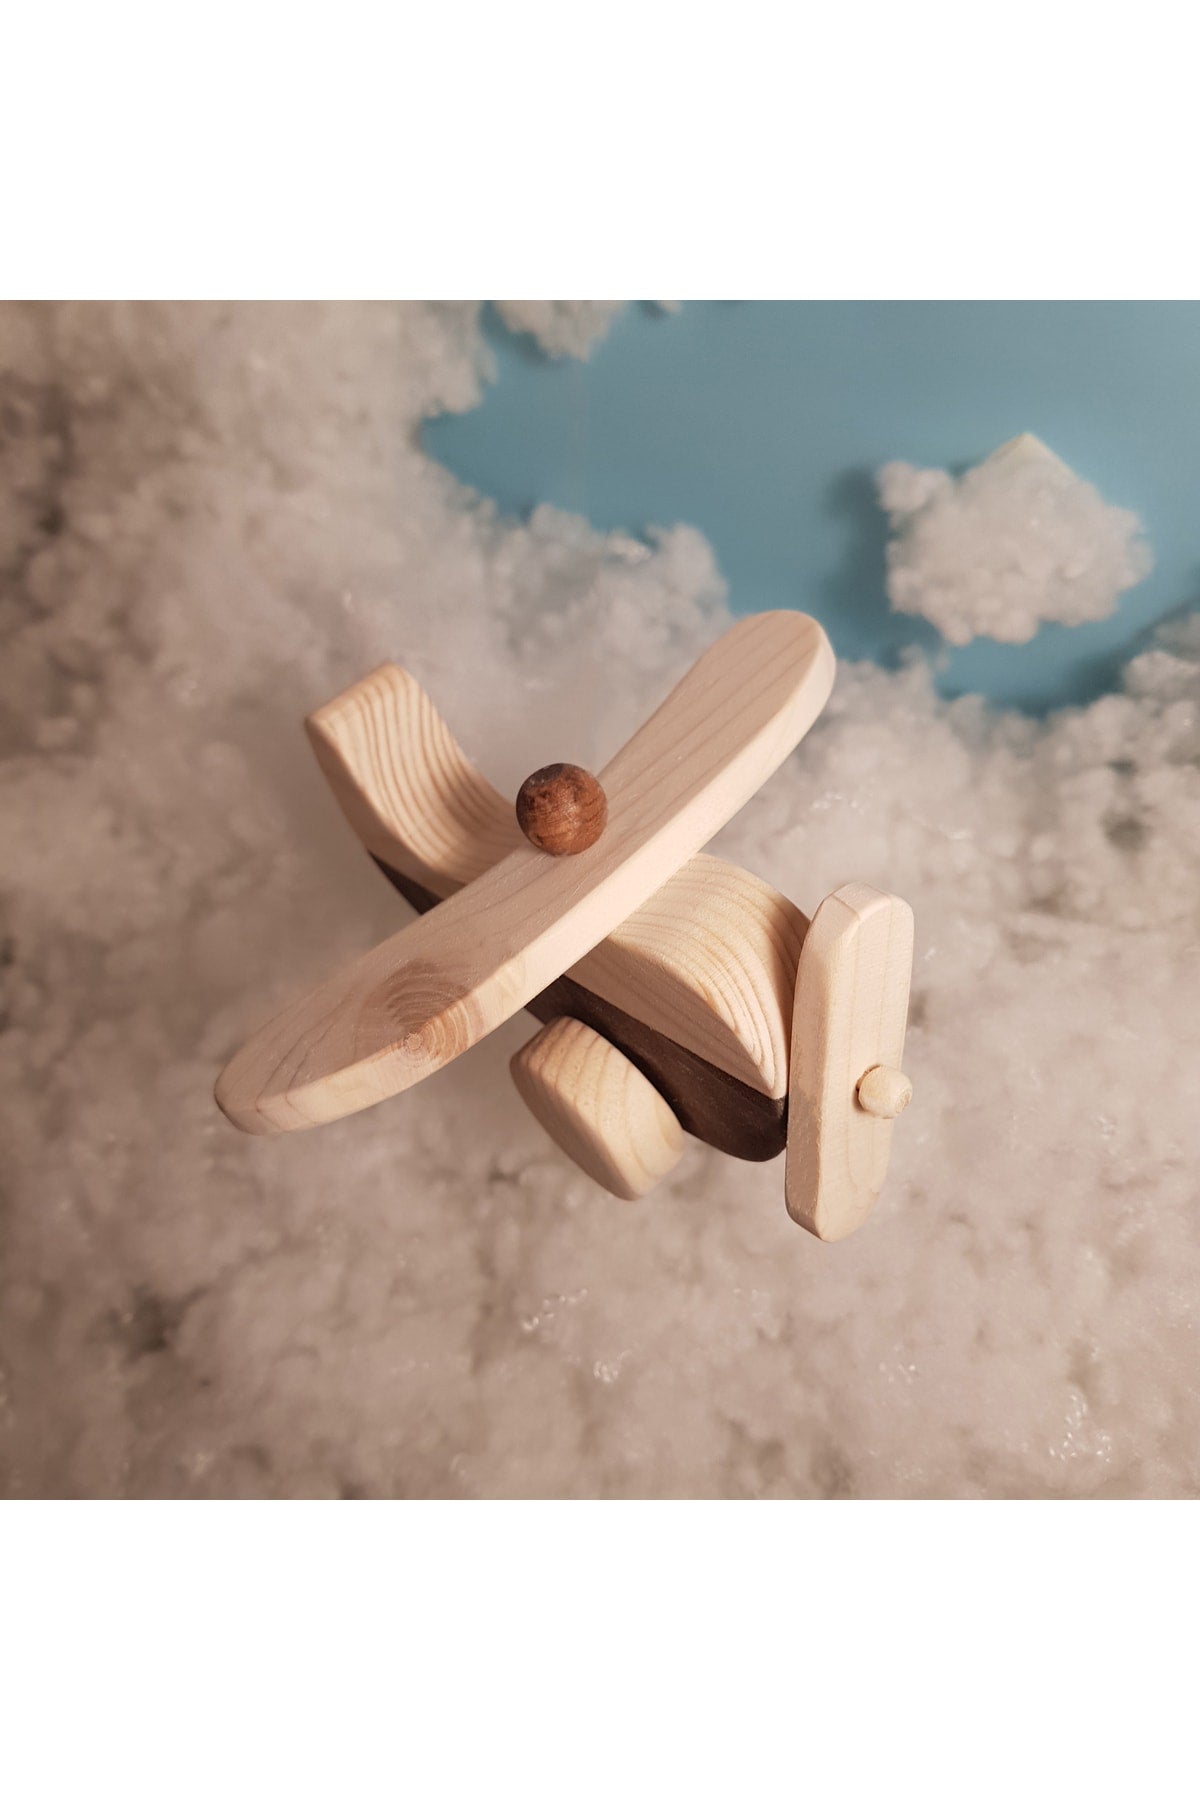 Handmade Wooden Toy Airplane, Educational, Creative, Vintage And Natural And Safe Wooden Baby Toy